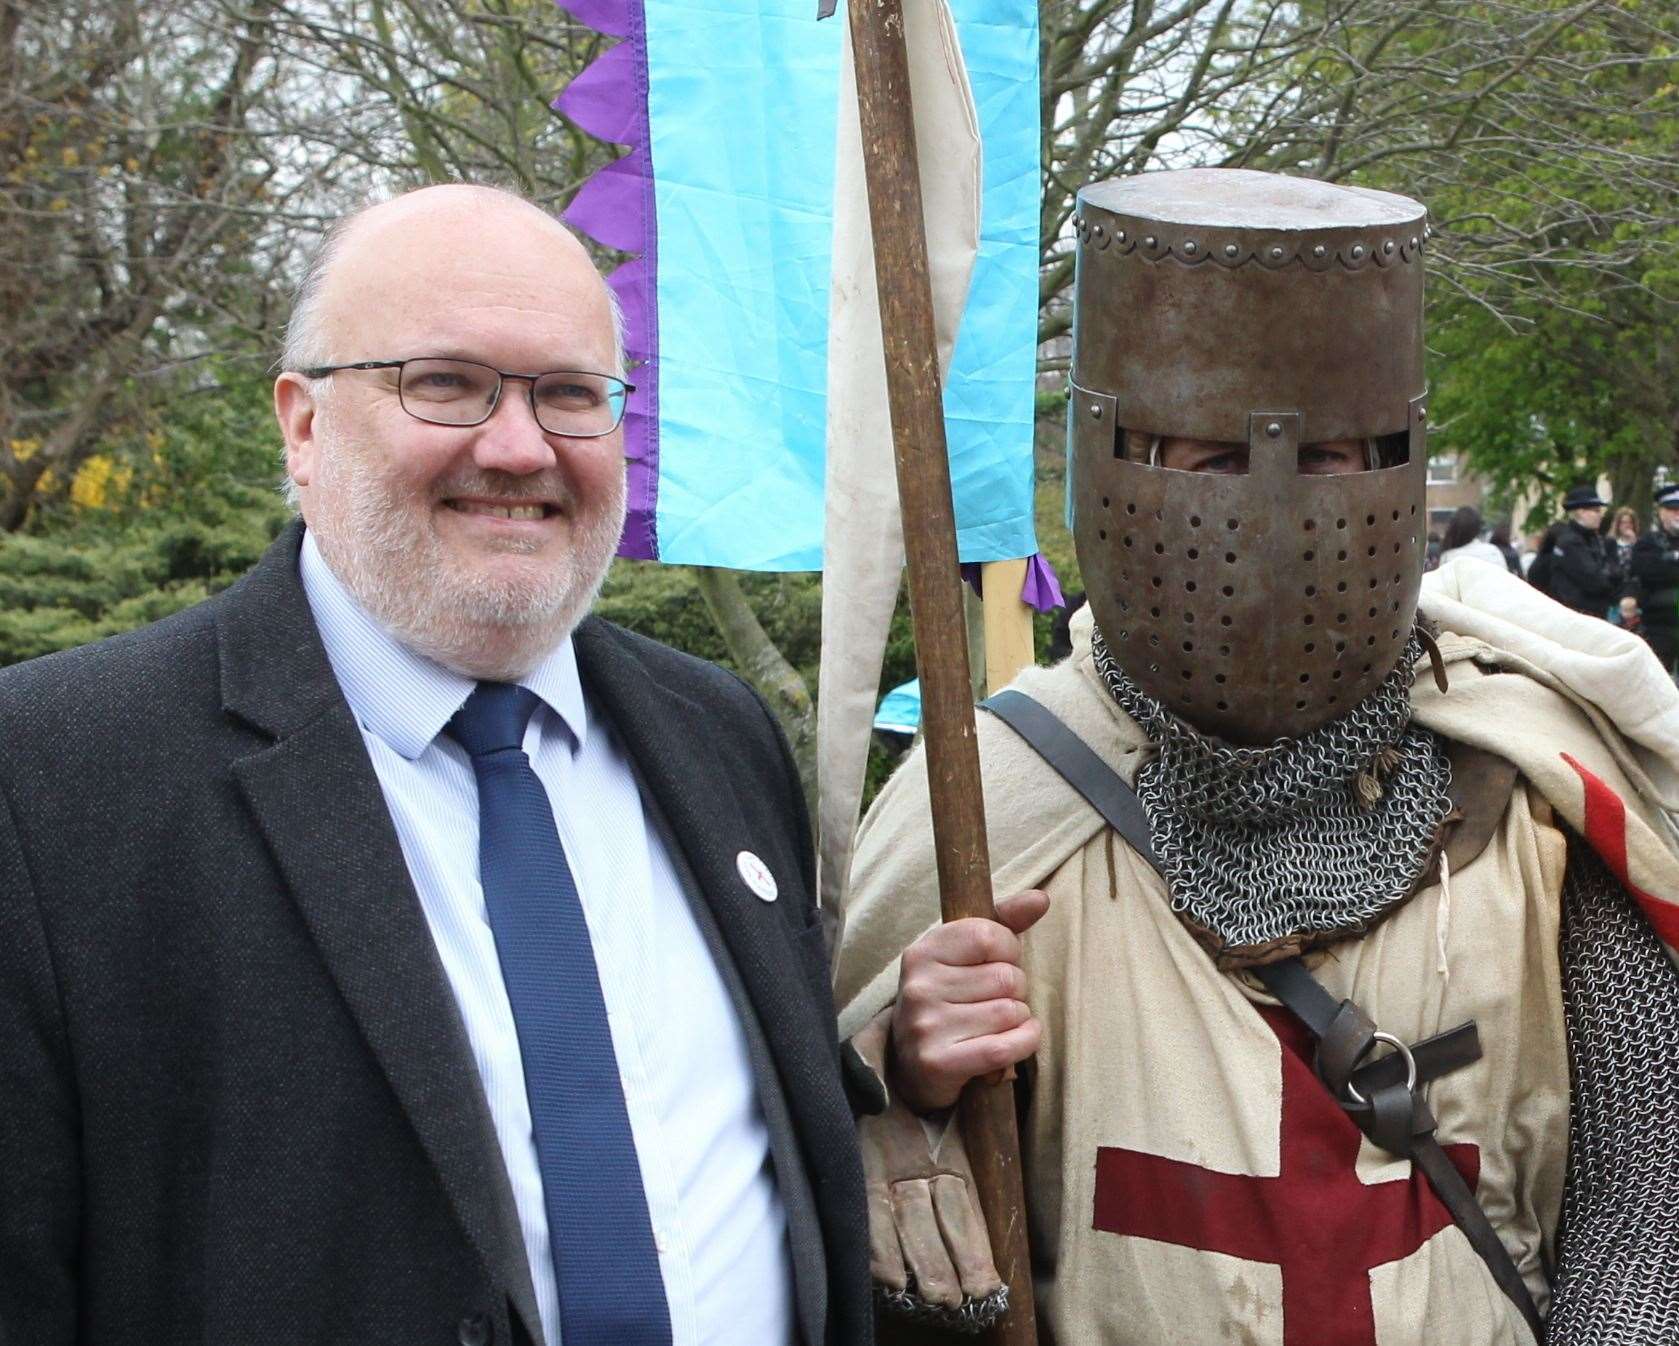 Jeremy Kite, The Leader of Dartford Council, with St George himself, or someone dressed like him